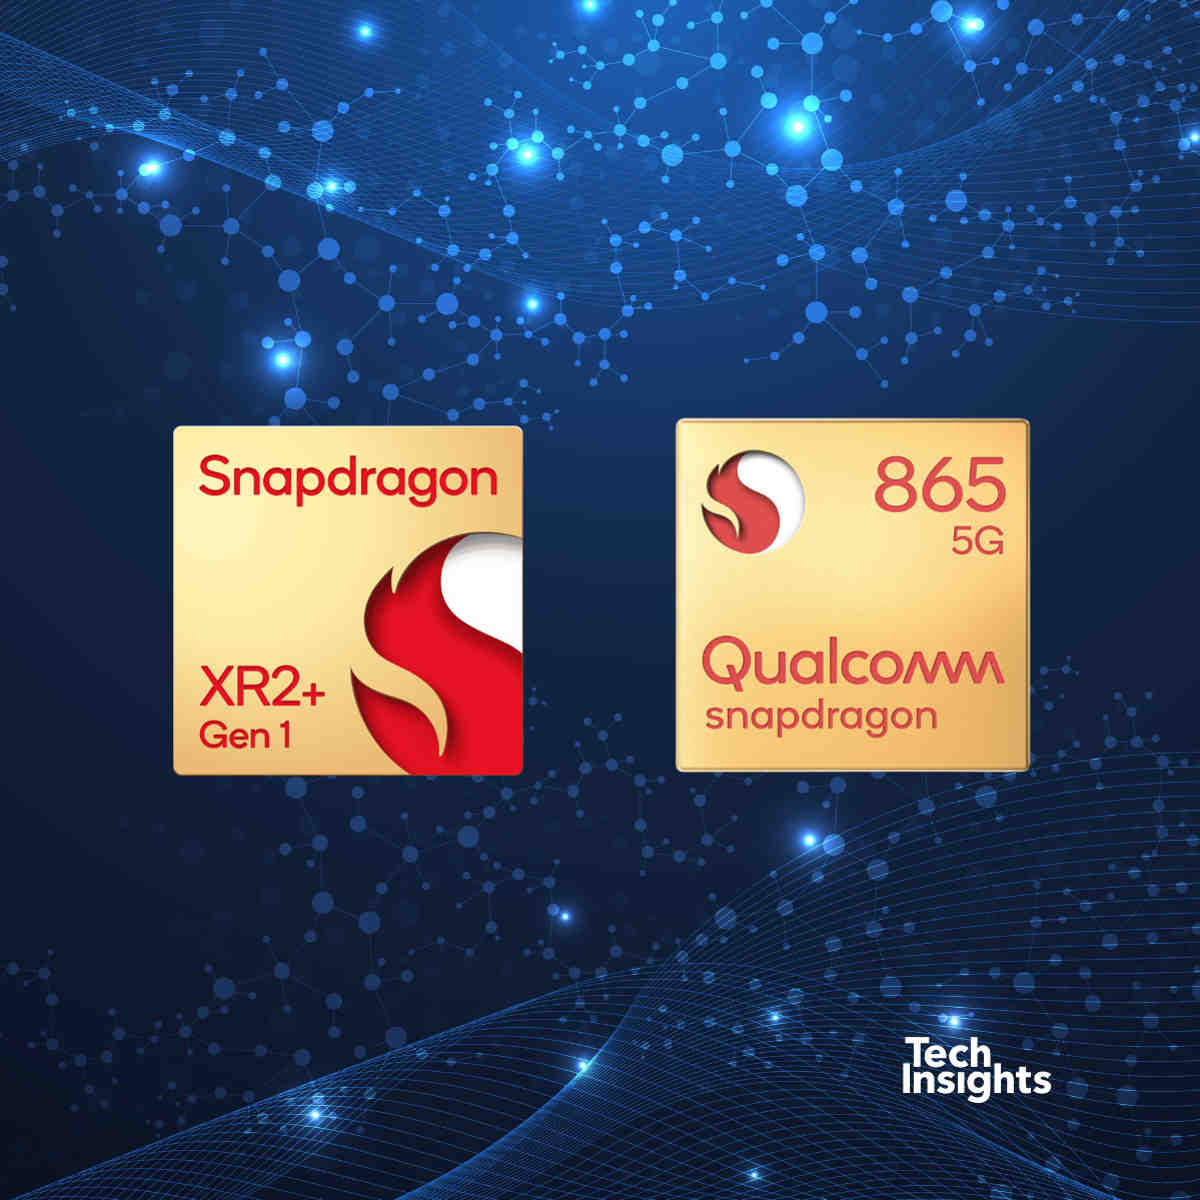 👉bit.ly/3JjKhZf 
@Qualcomm XR2+ Gen1 offers 50% more sustained power & 30% better thermal performance than its predecessor owing to a new package, faster clock speeds & smarter thermal management. Dive into the details in our latest blog. #XR2+Gen1 #Semiconductor